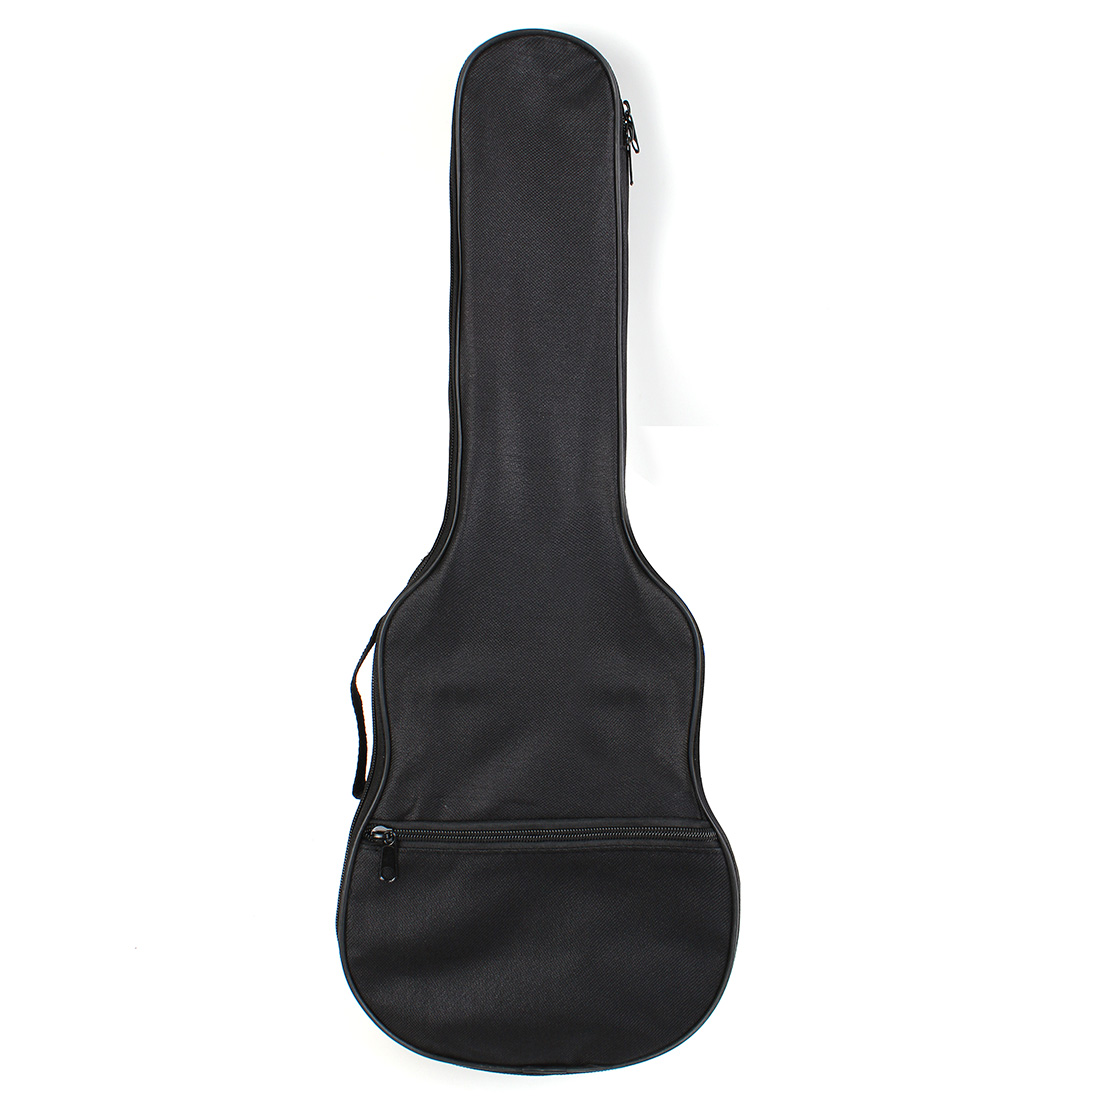 Compare Prices on Musical Instruments Cases.